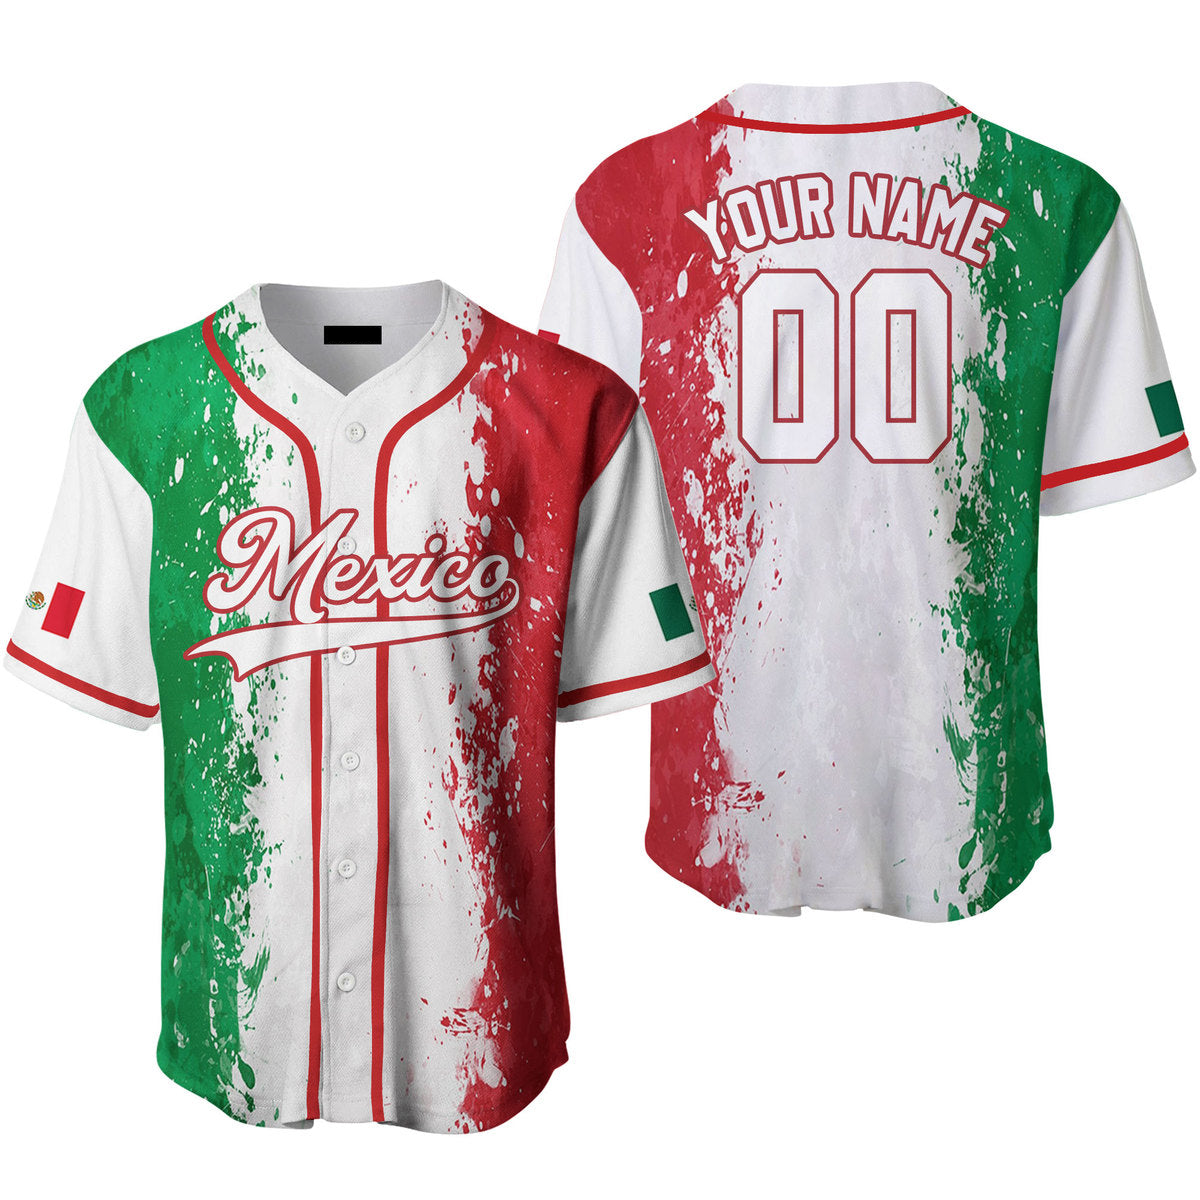 Mexico Colorful White Black Custom Name Baseball Jerseys/ Gift for Mexicans/ Pride Mexican